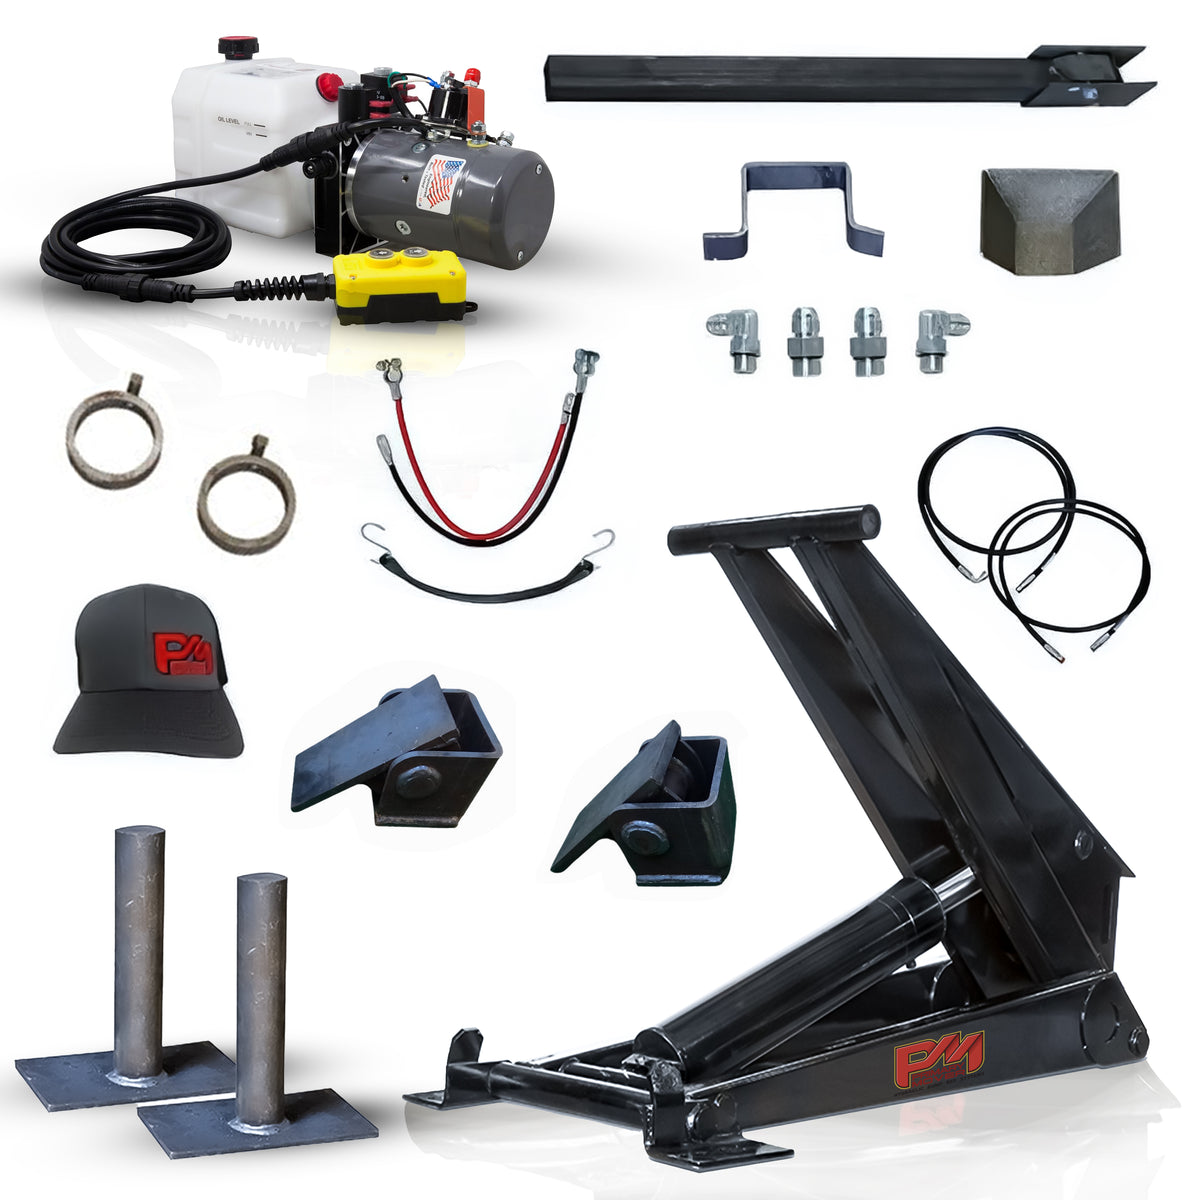 Hydraulic Scissor Hoist Kit - 12 Ton Capacity - Fits 18-24' Dump Body | PF-630: Collage of hydraulic equipment, machine parts, metal objects, and a white container with red knob. Includes cylinder, mounting brackets, hydraulic pump, and more.